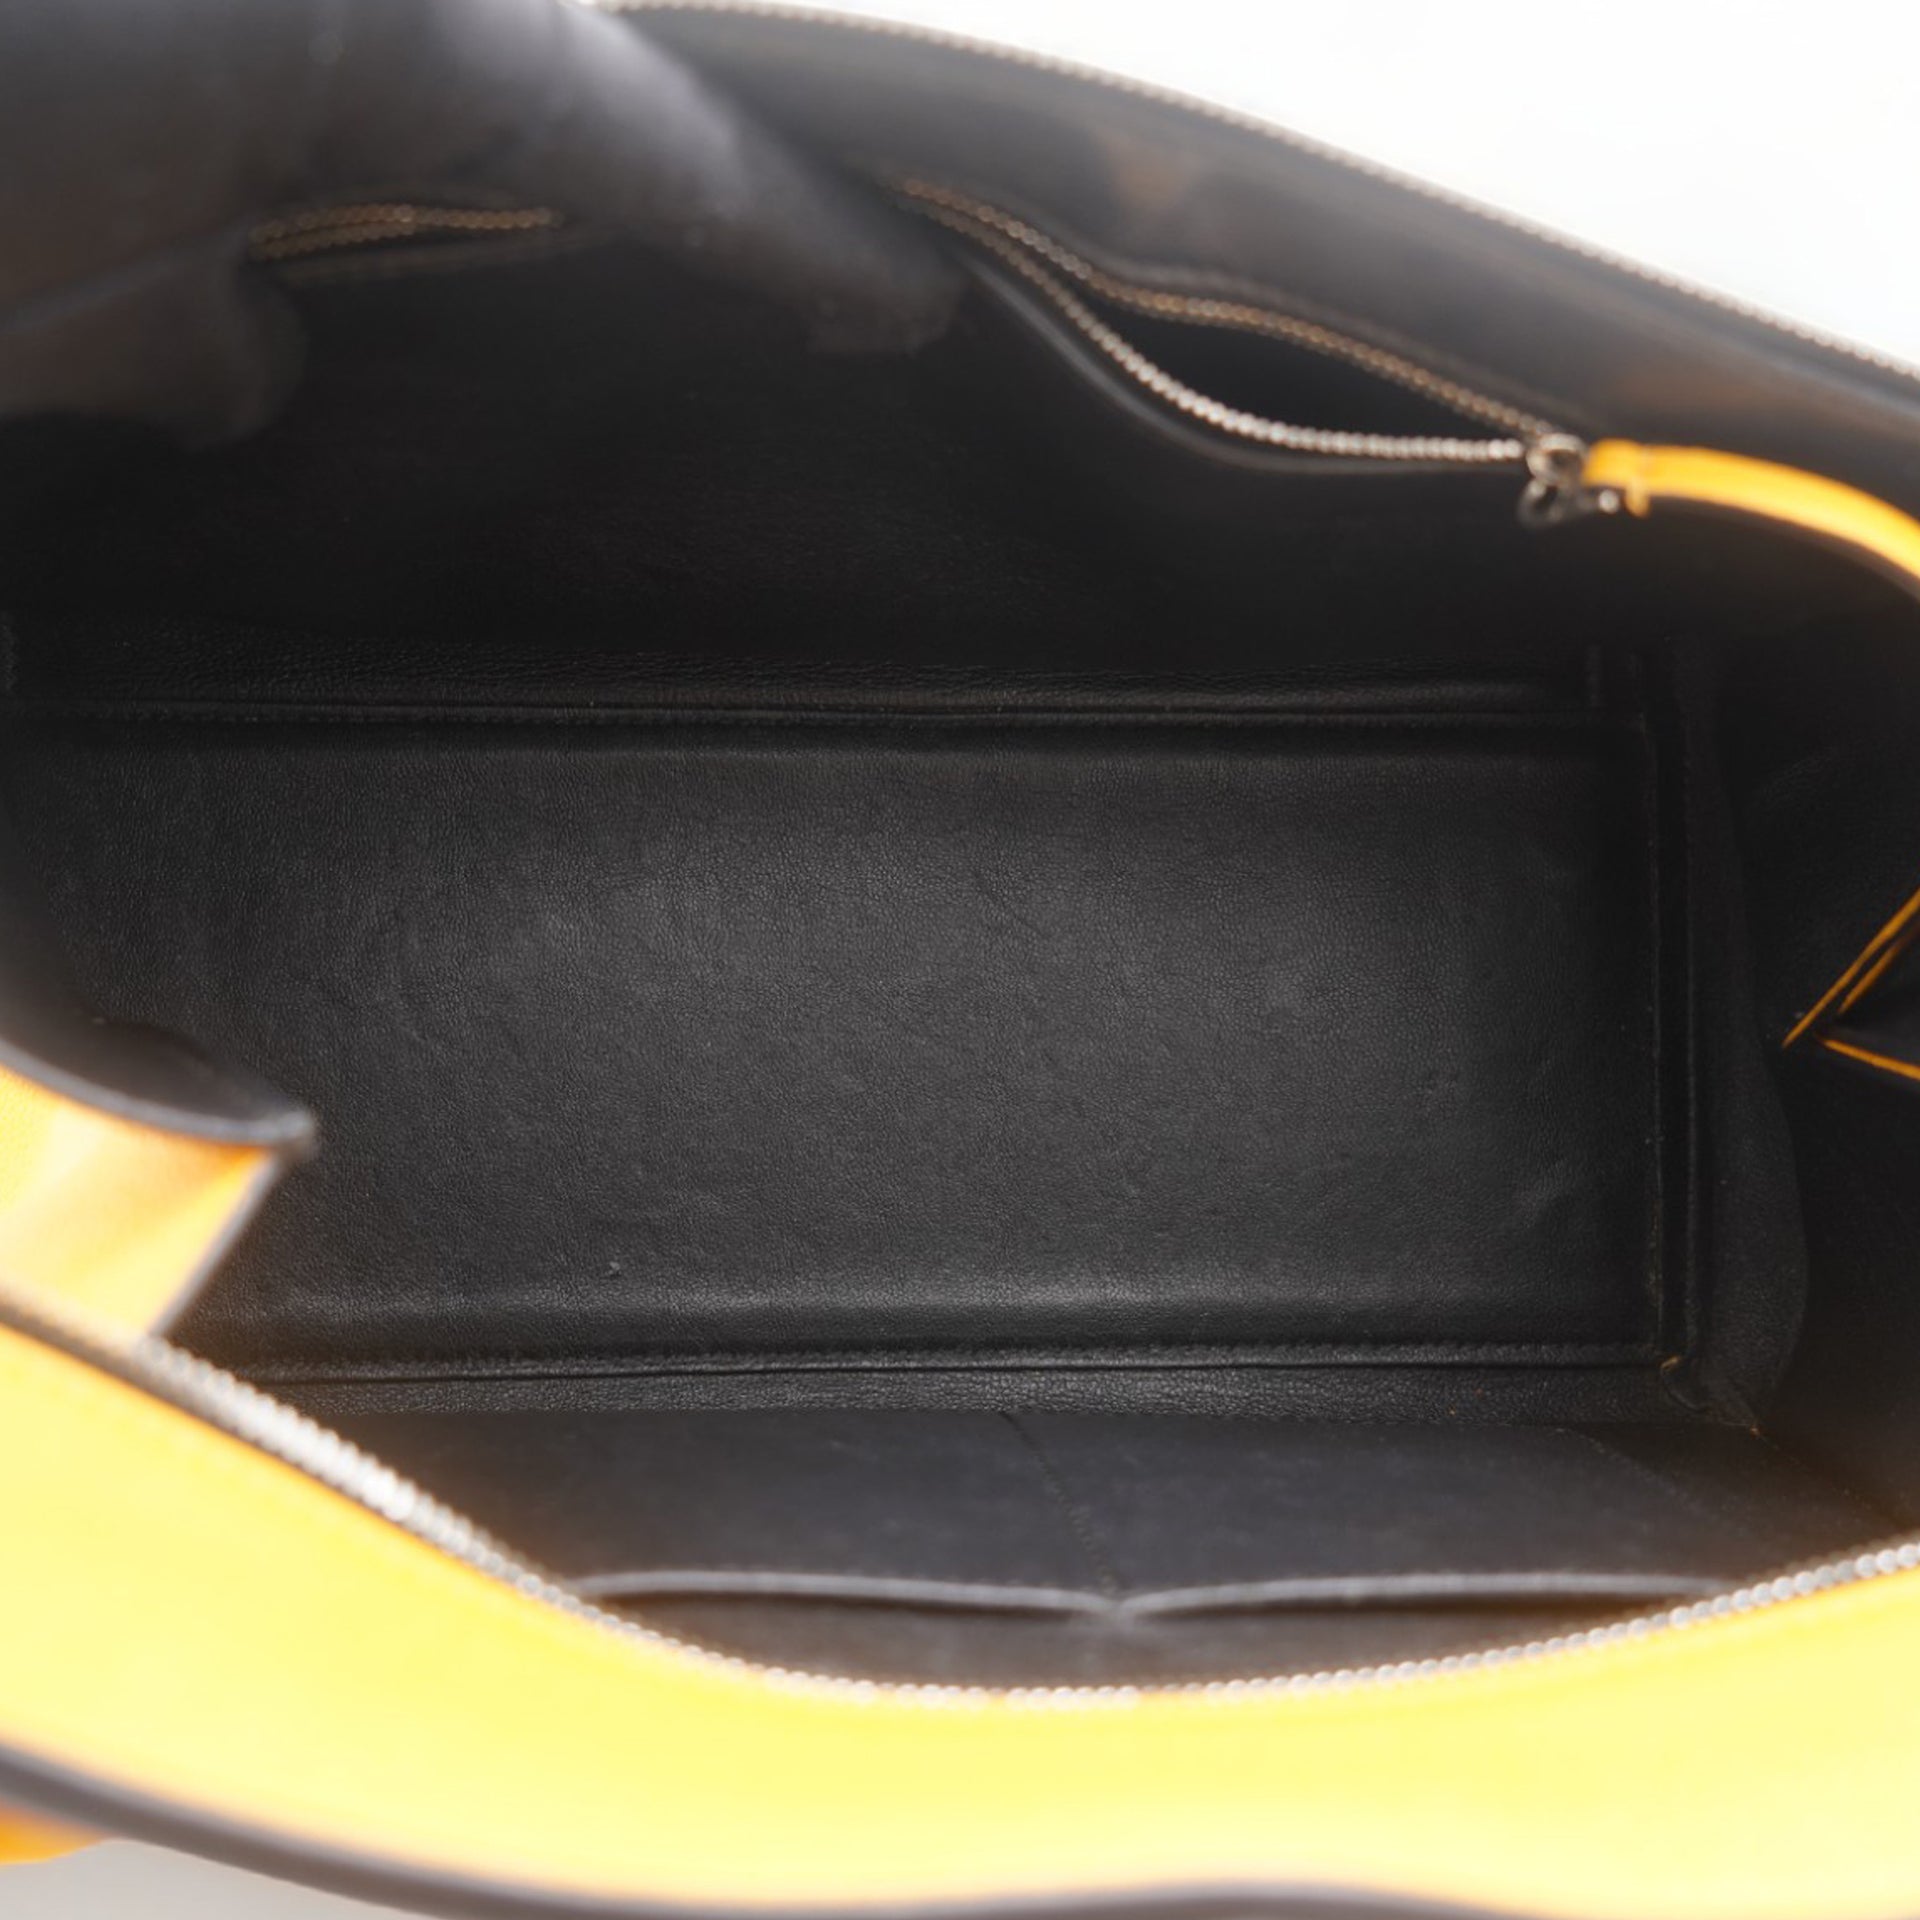 Edge Grained Leather Yellow Bag